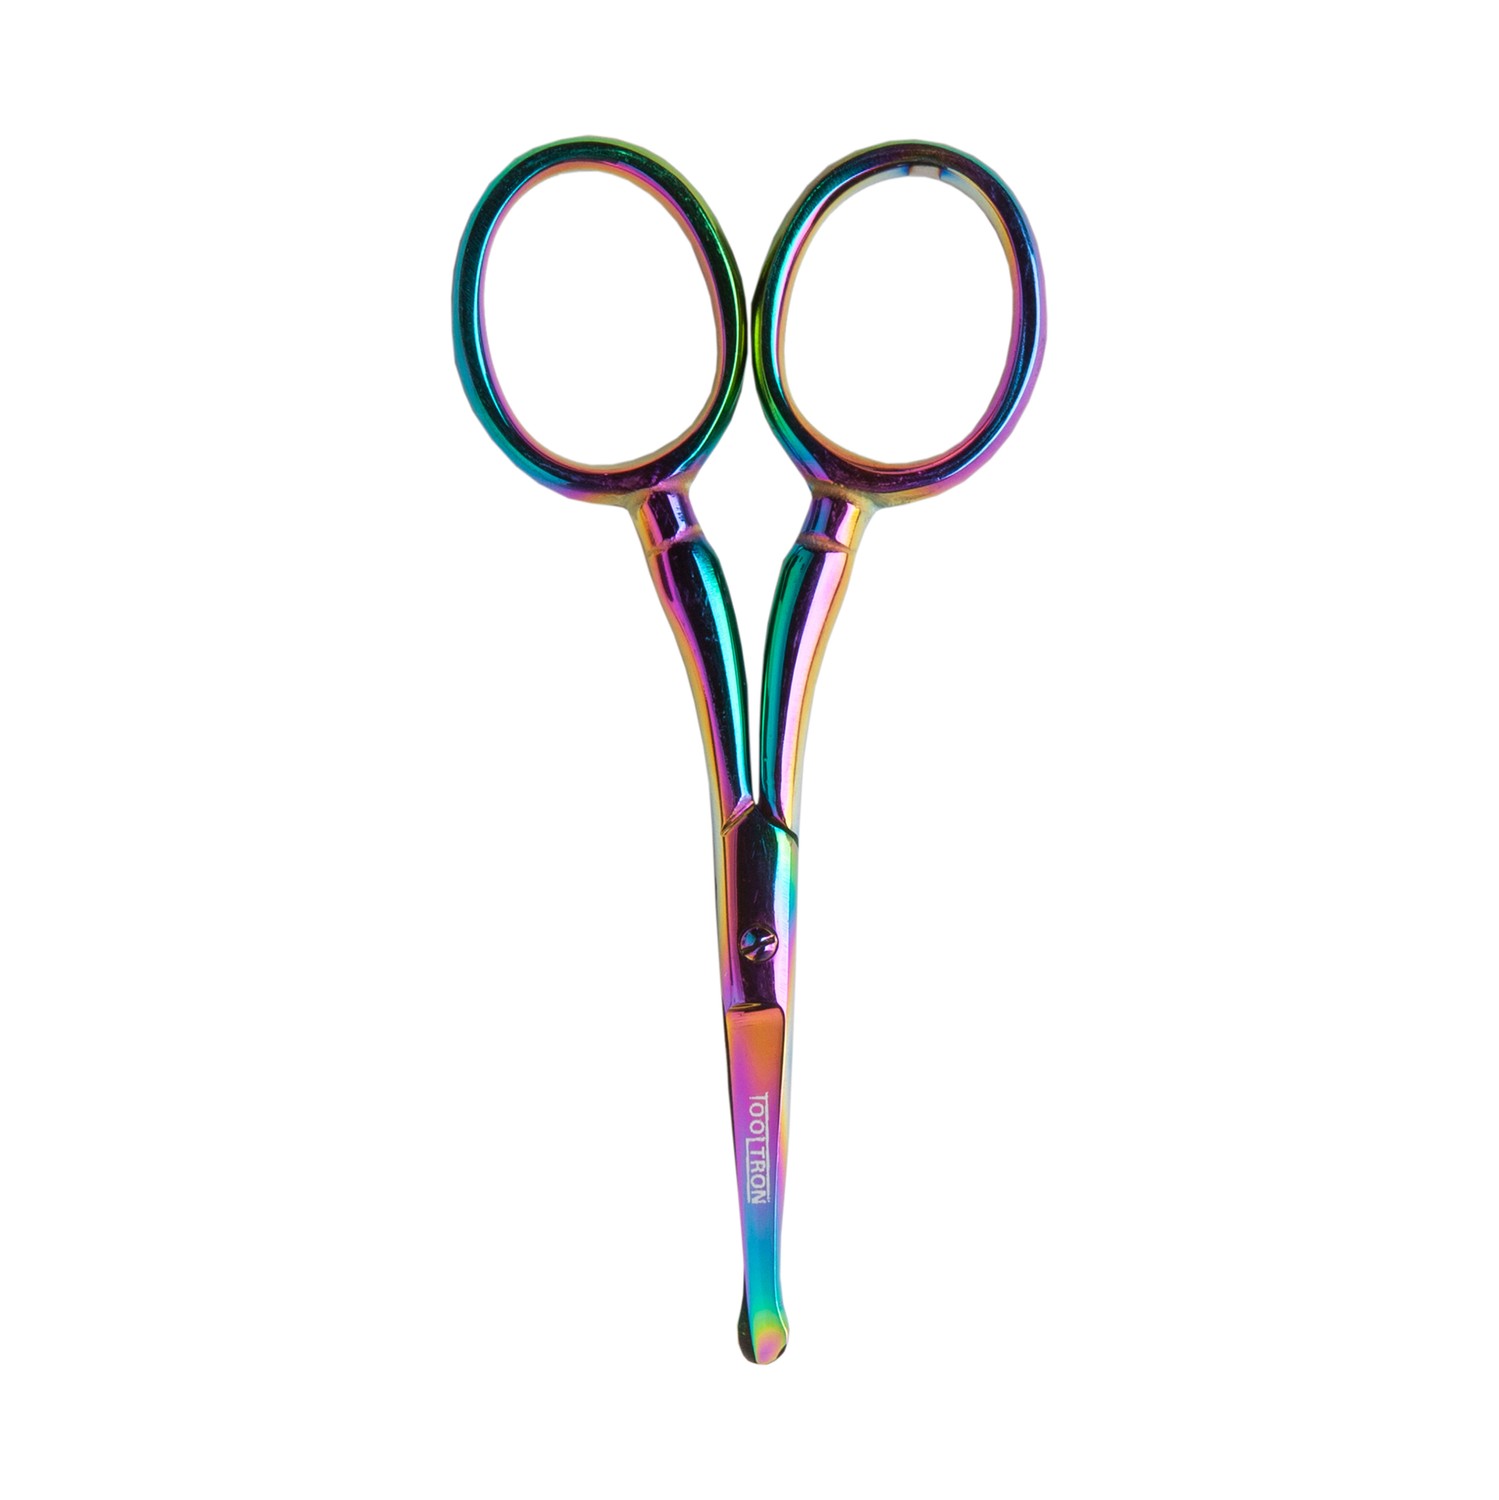 Tooltron 3 1/2 inch Rainbow Curved Safety Scissors with Blunt End